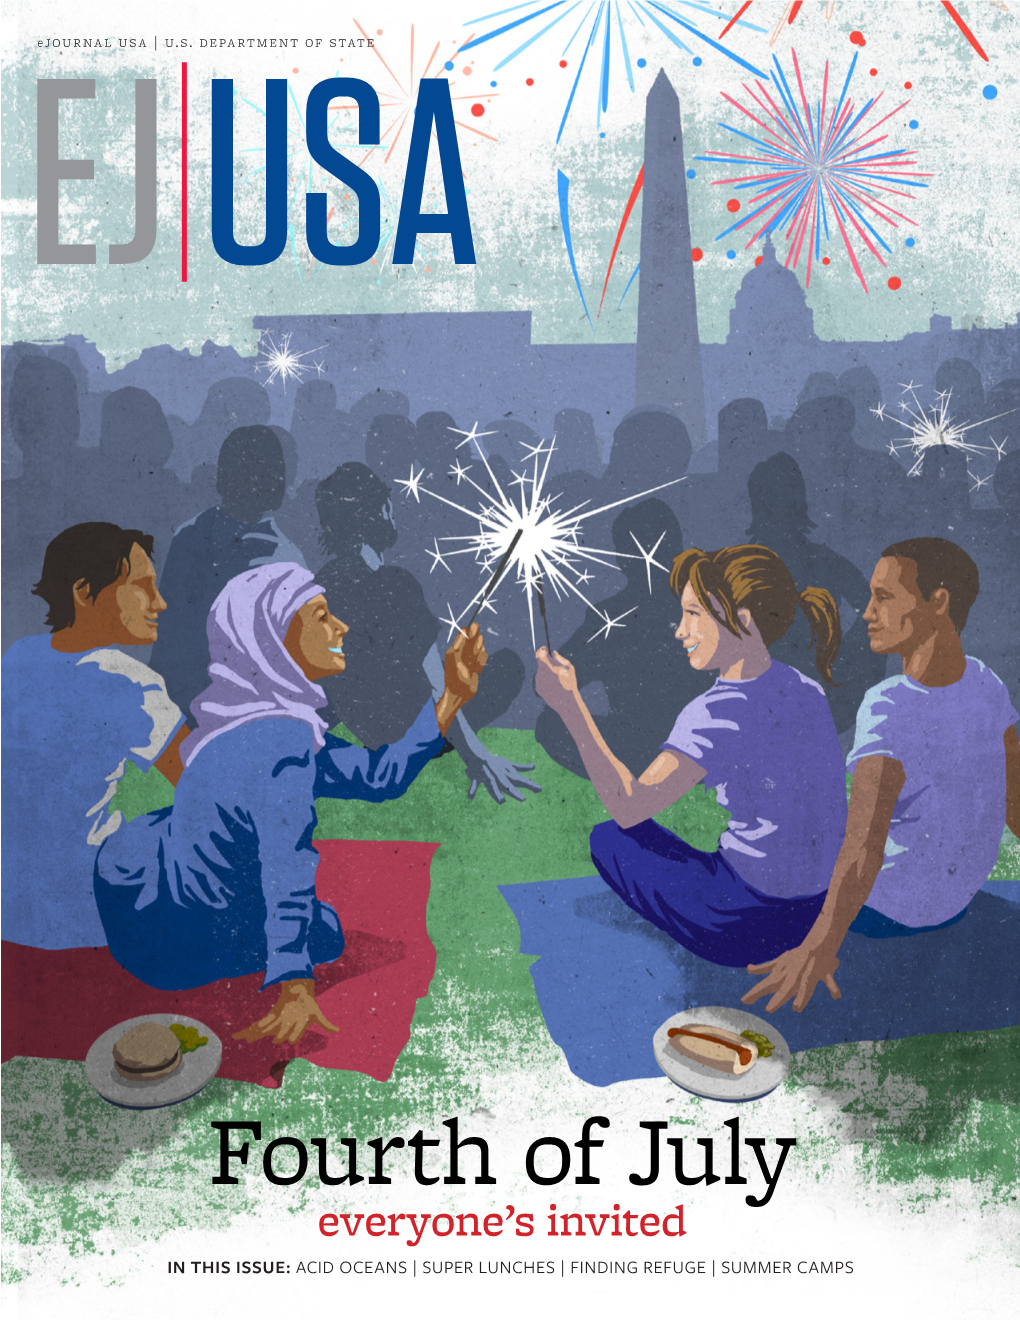 Fourth of July Everyone’S Invited in THIS ISSUE: ACID OCEANS | SUPER LUNCHES | FINDING REFUGE | SUMMER CAMPS